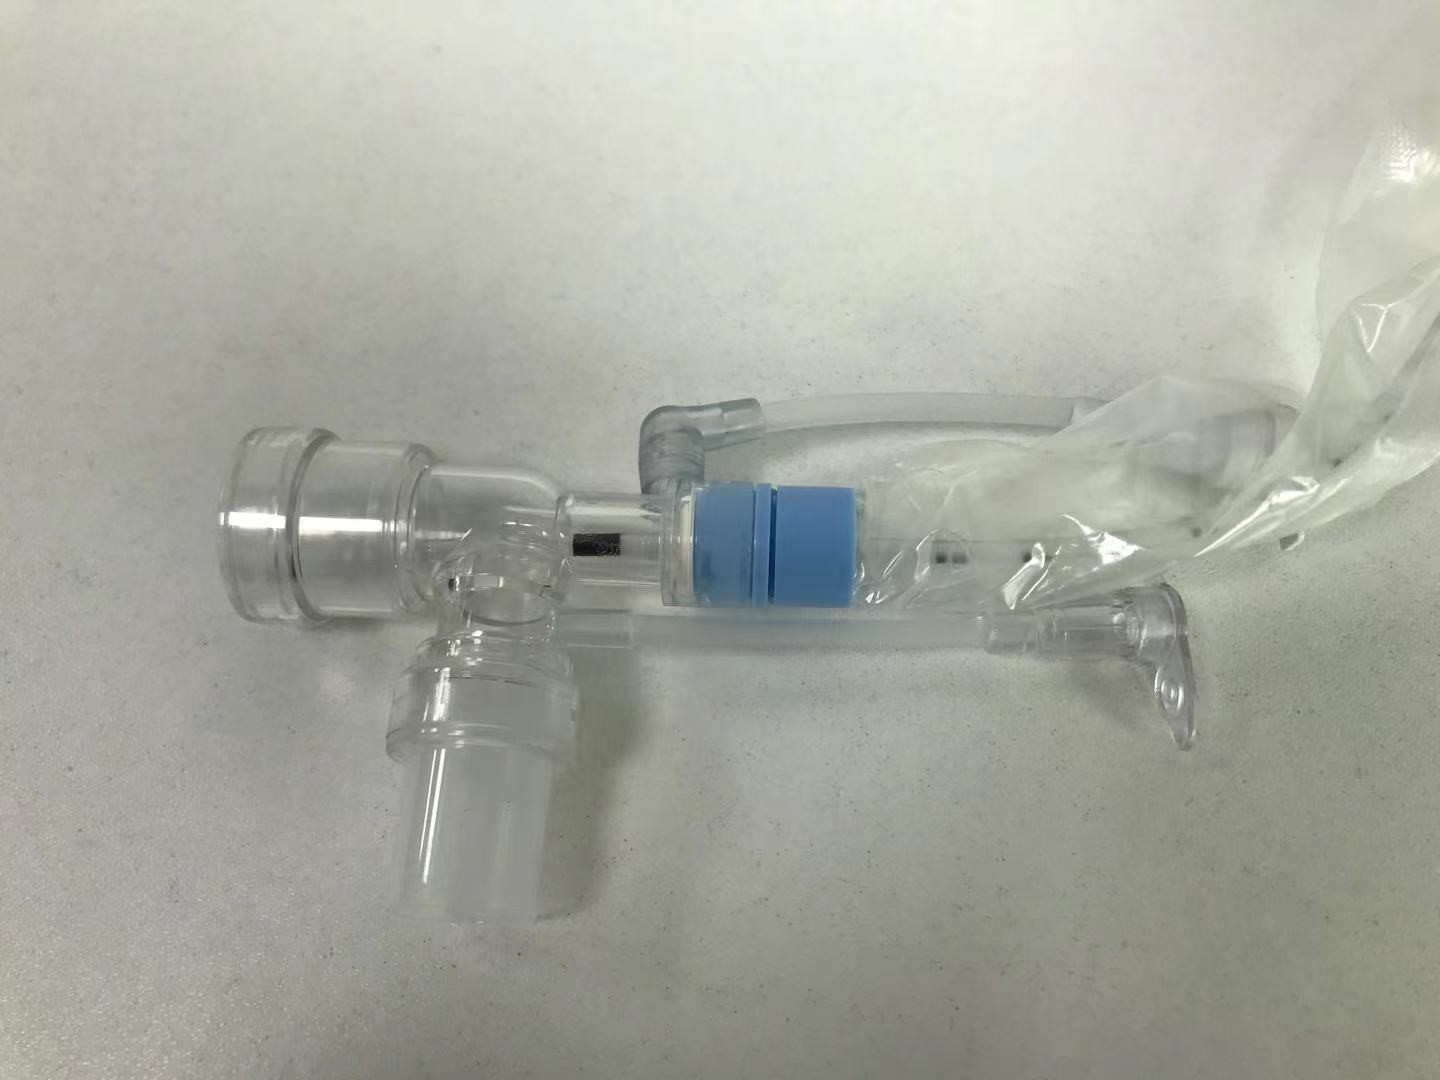  2.7mm Dia Closed Circuit Suction Catheter 8 French Suction Catheter With Soft Suction Tip Manufactures